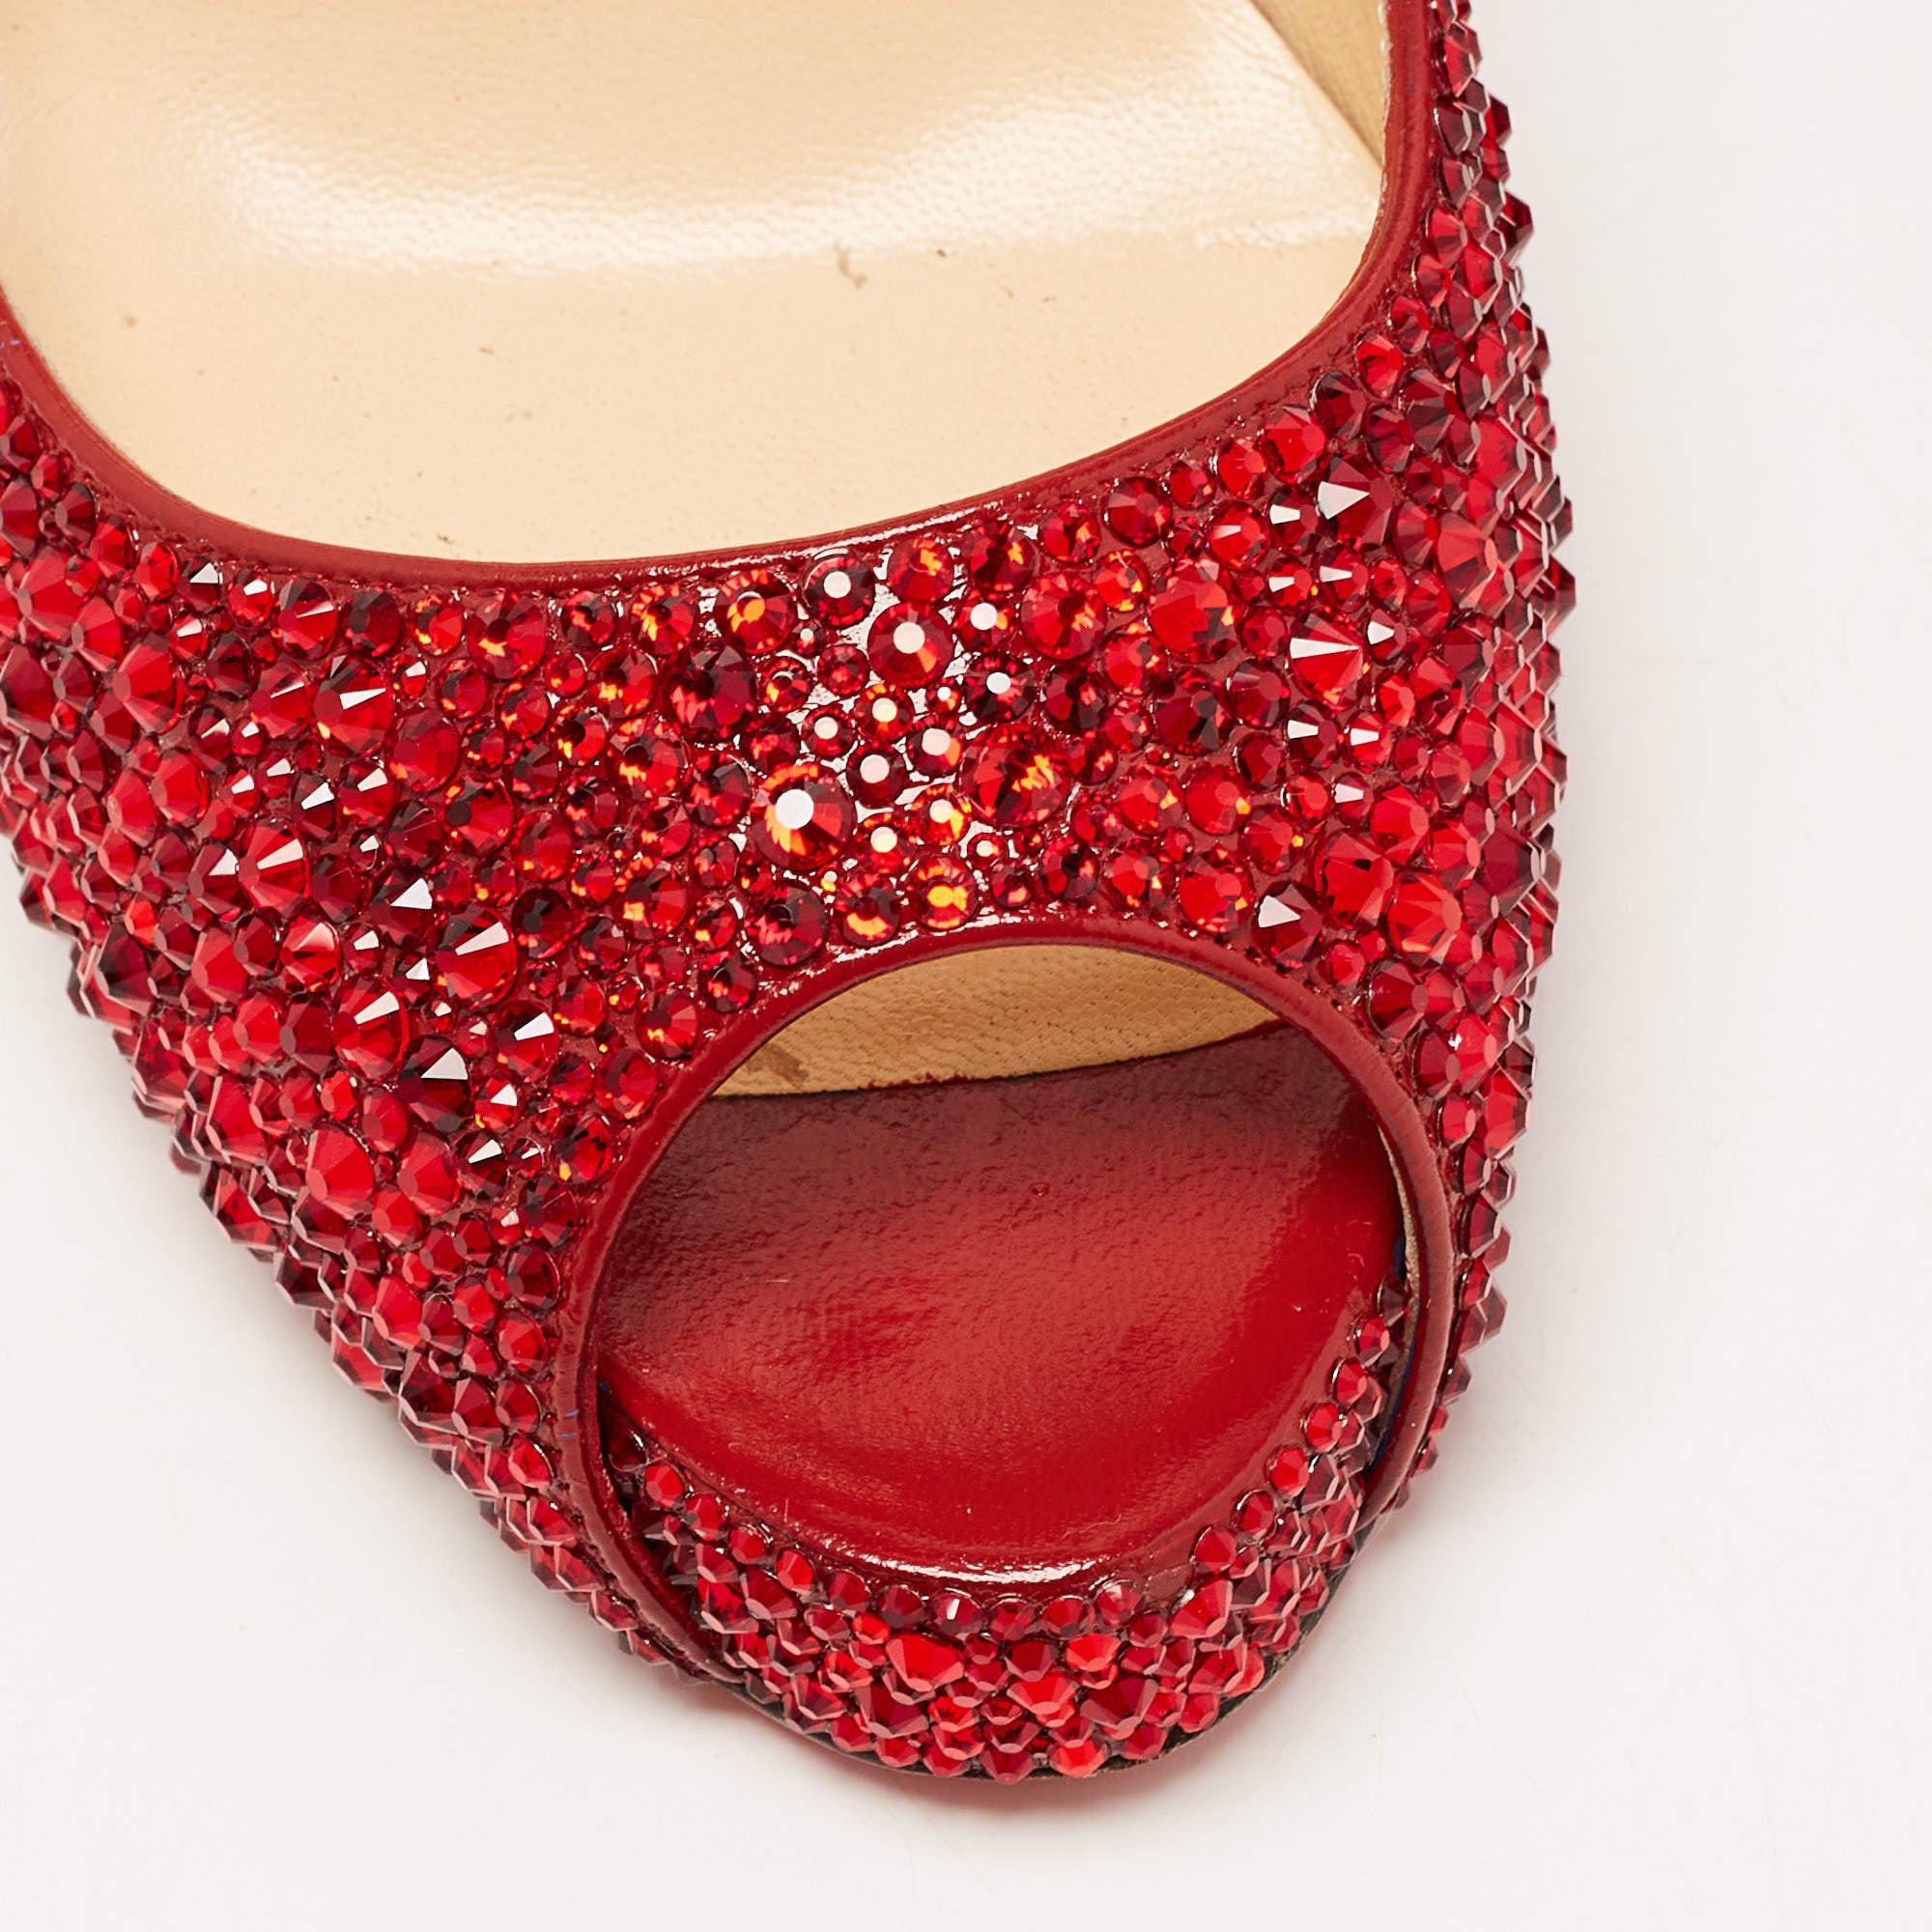 Christian Louboutin Red Leather Strass Very Prive Pumps Size 37.5 For Sale 2